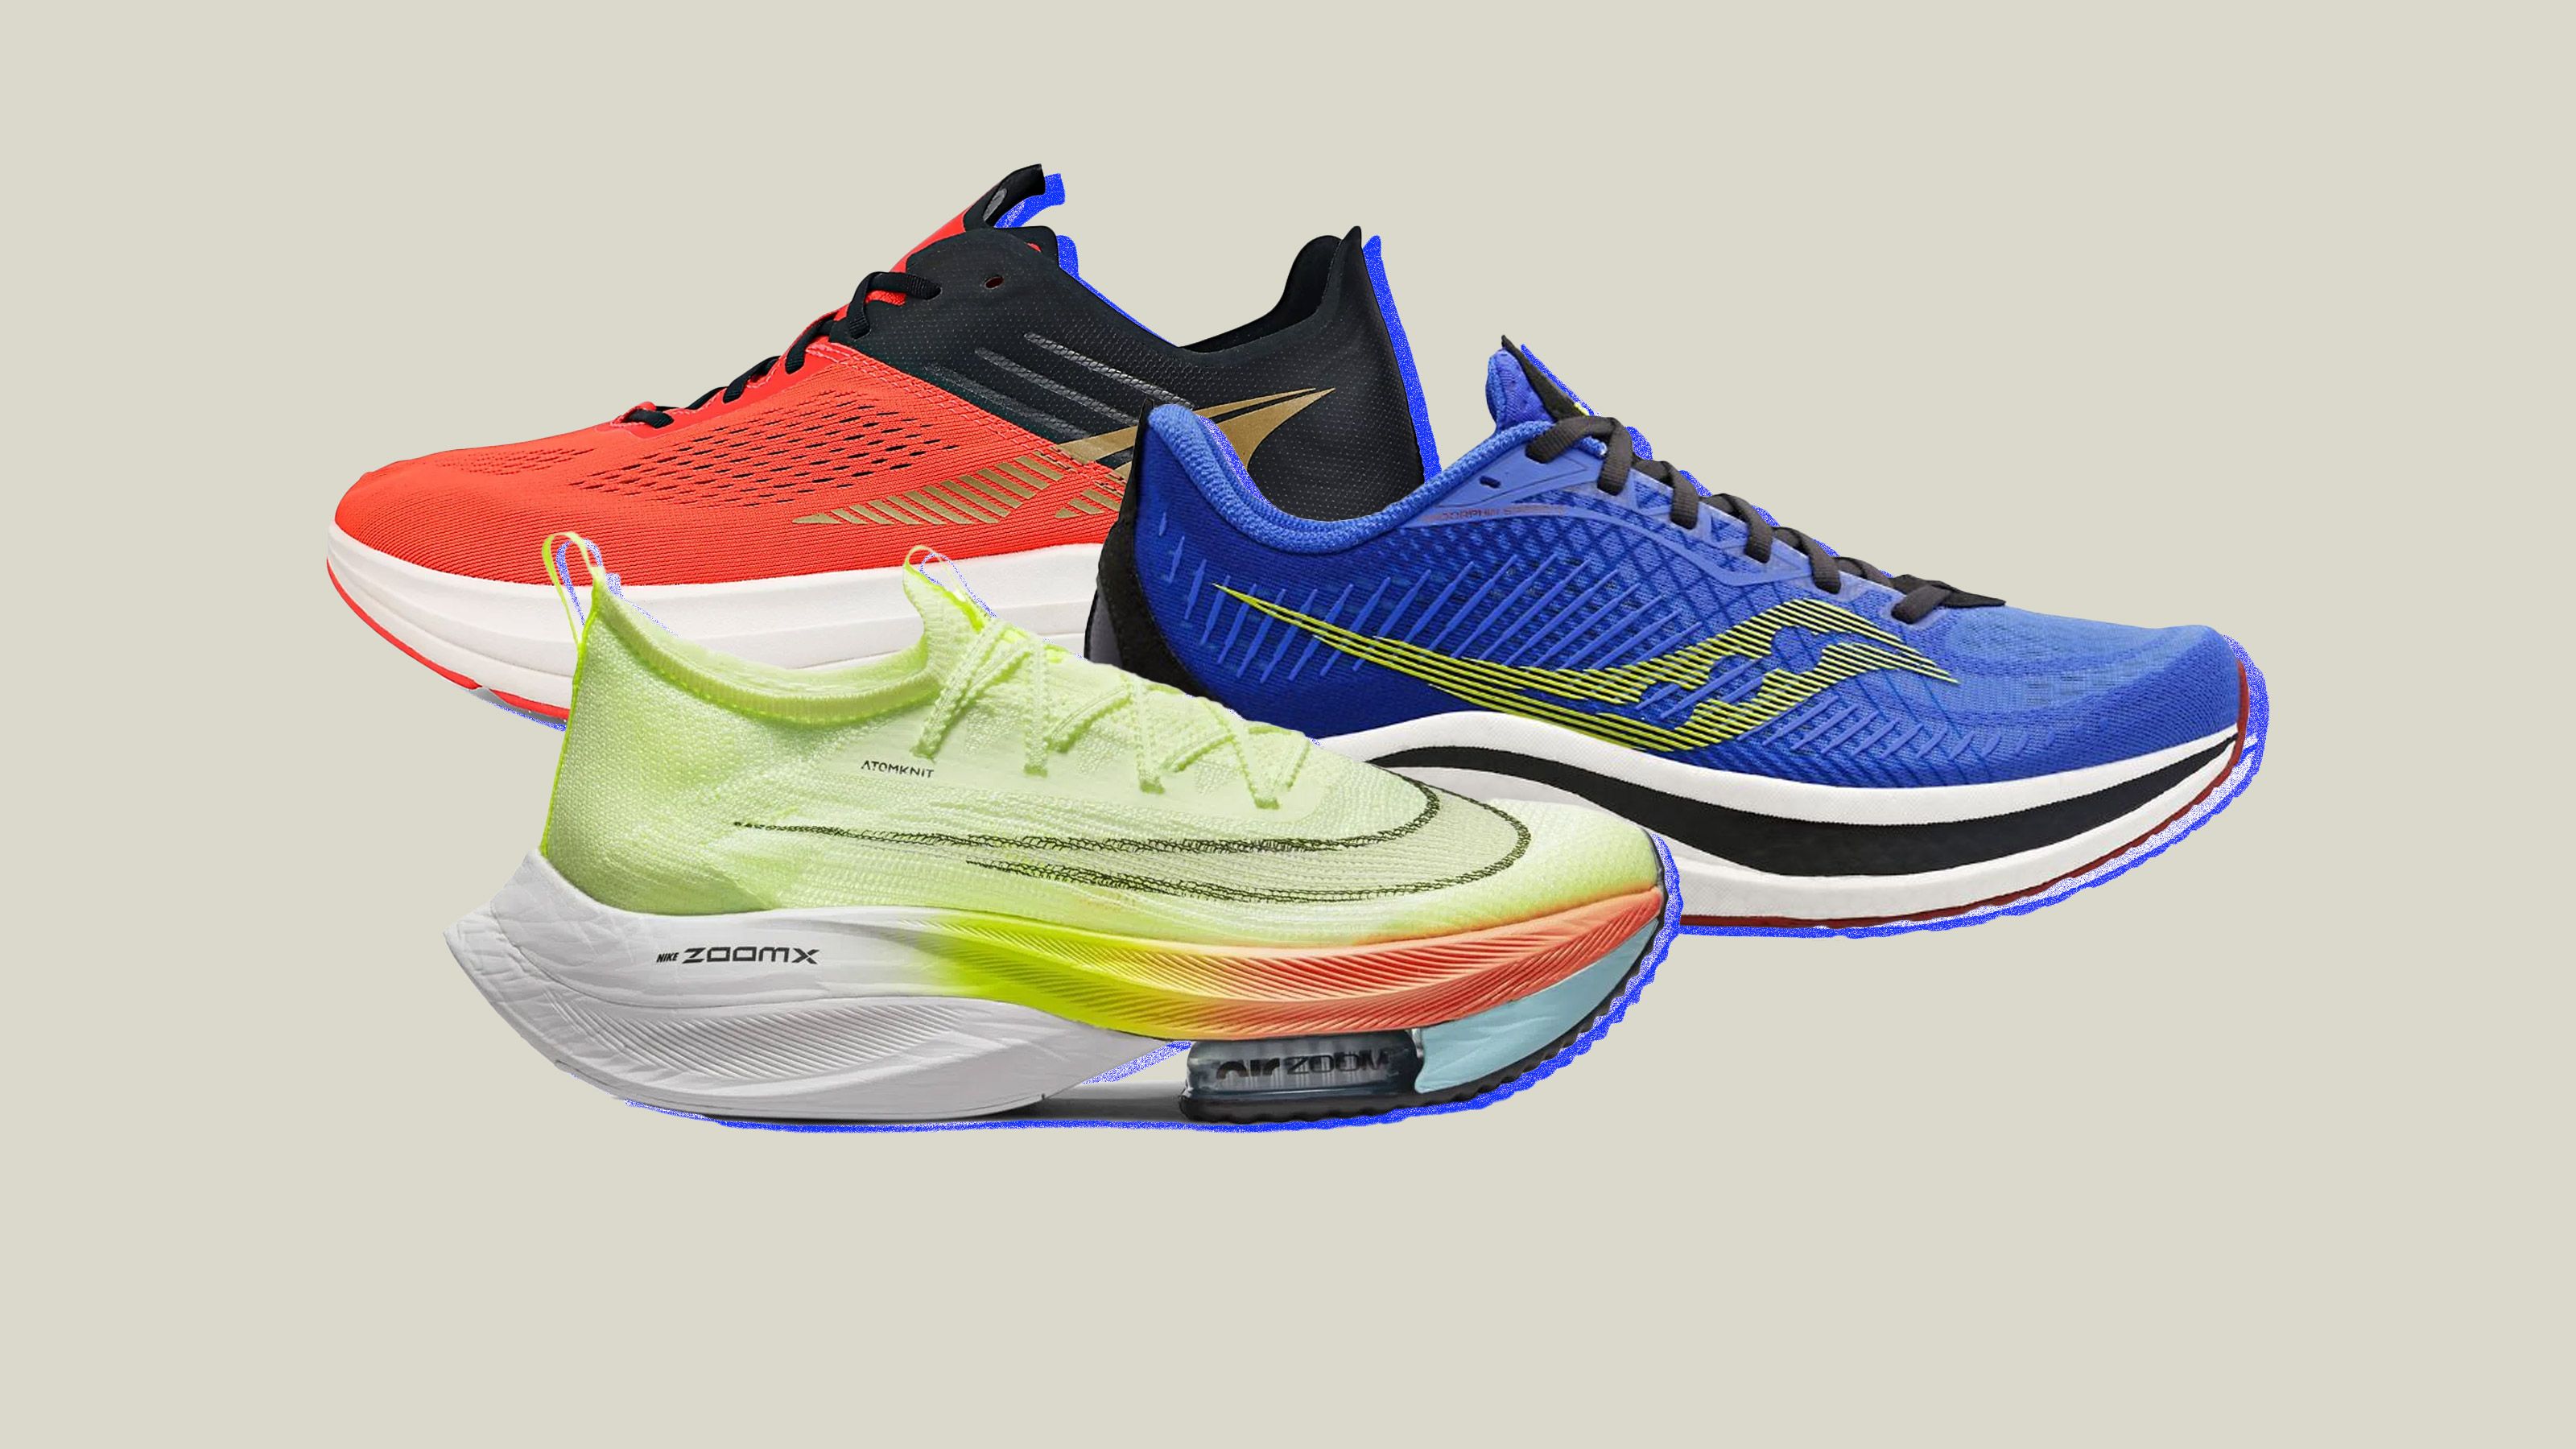 These Are the Shoes You Need to Run Your Fastest Mile